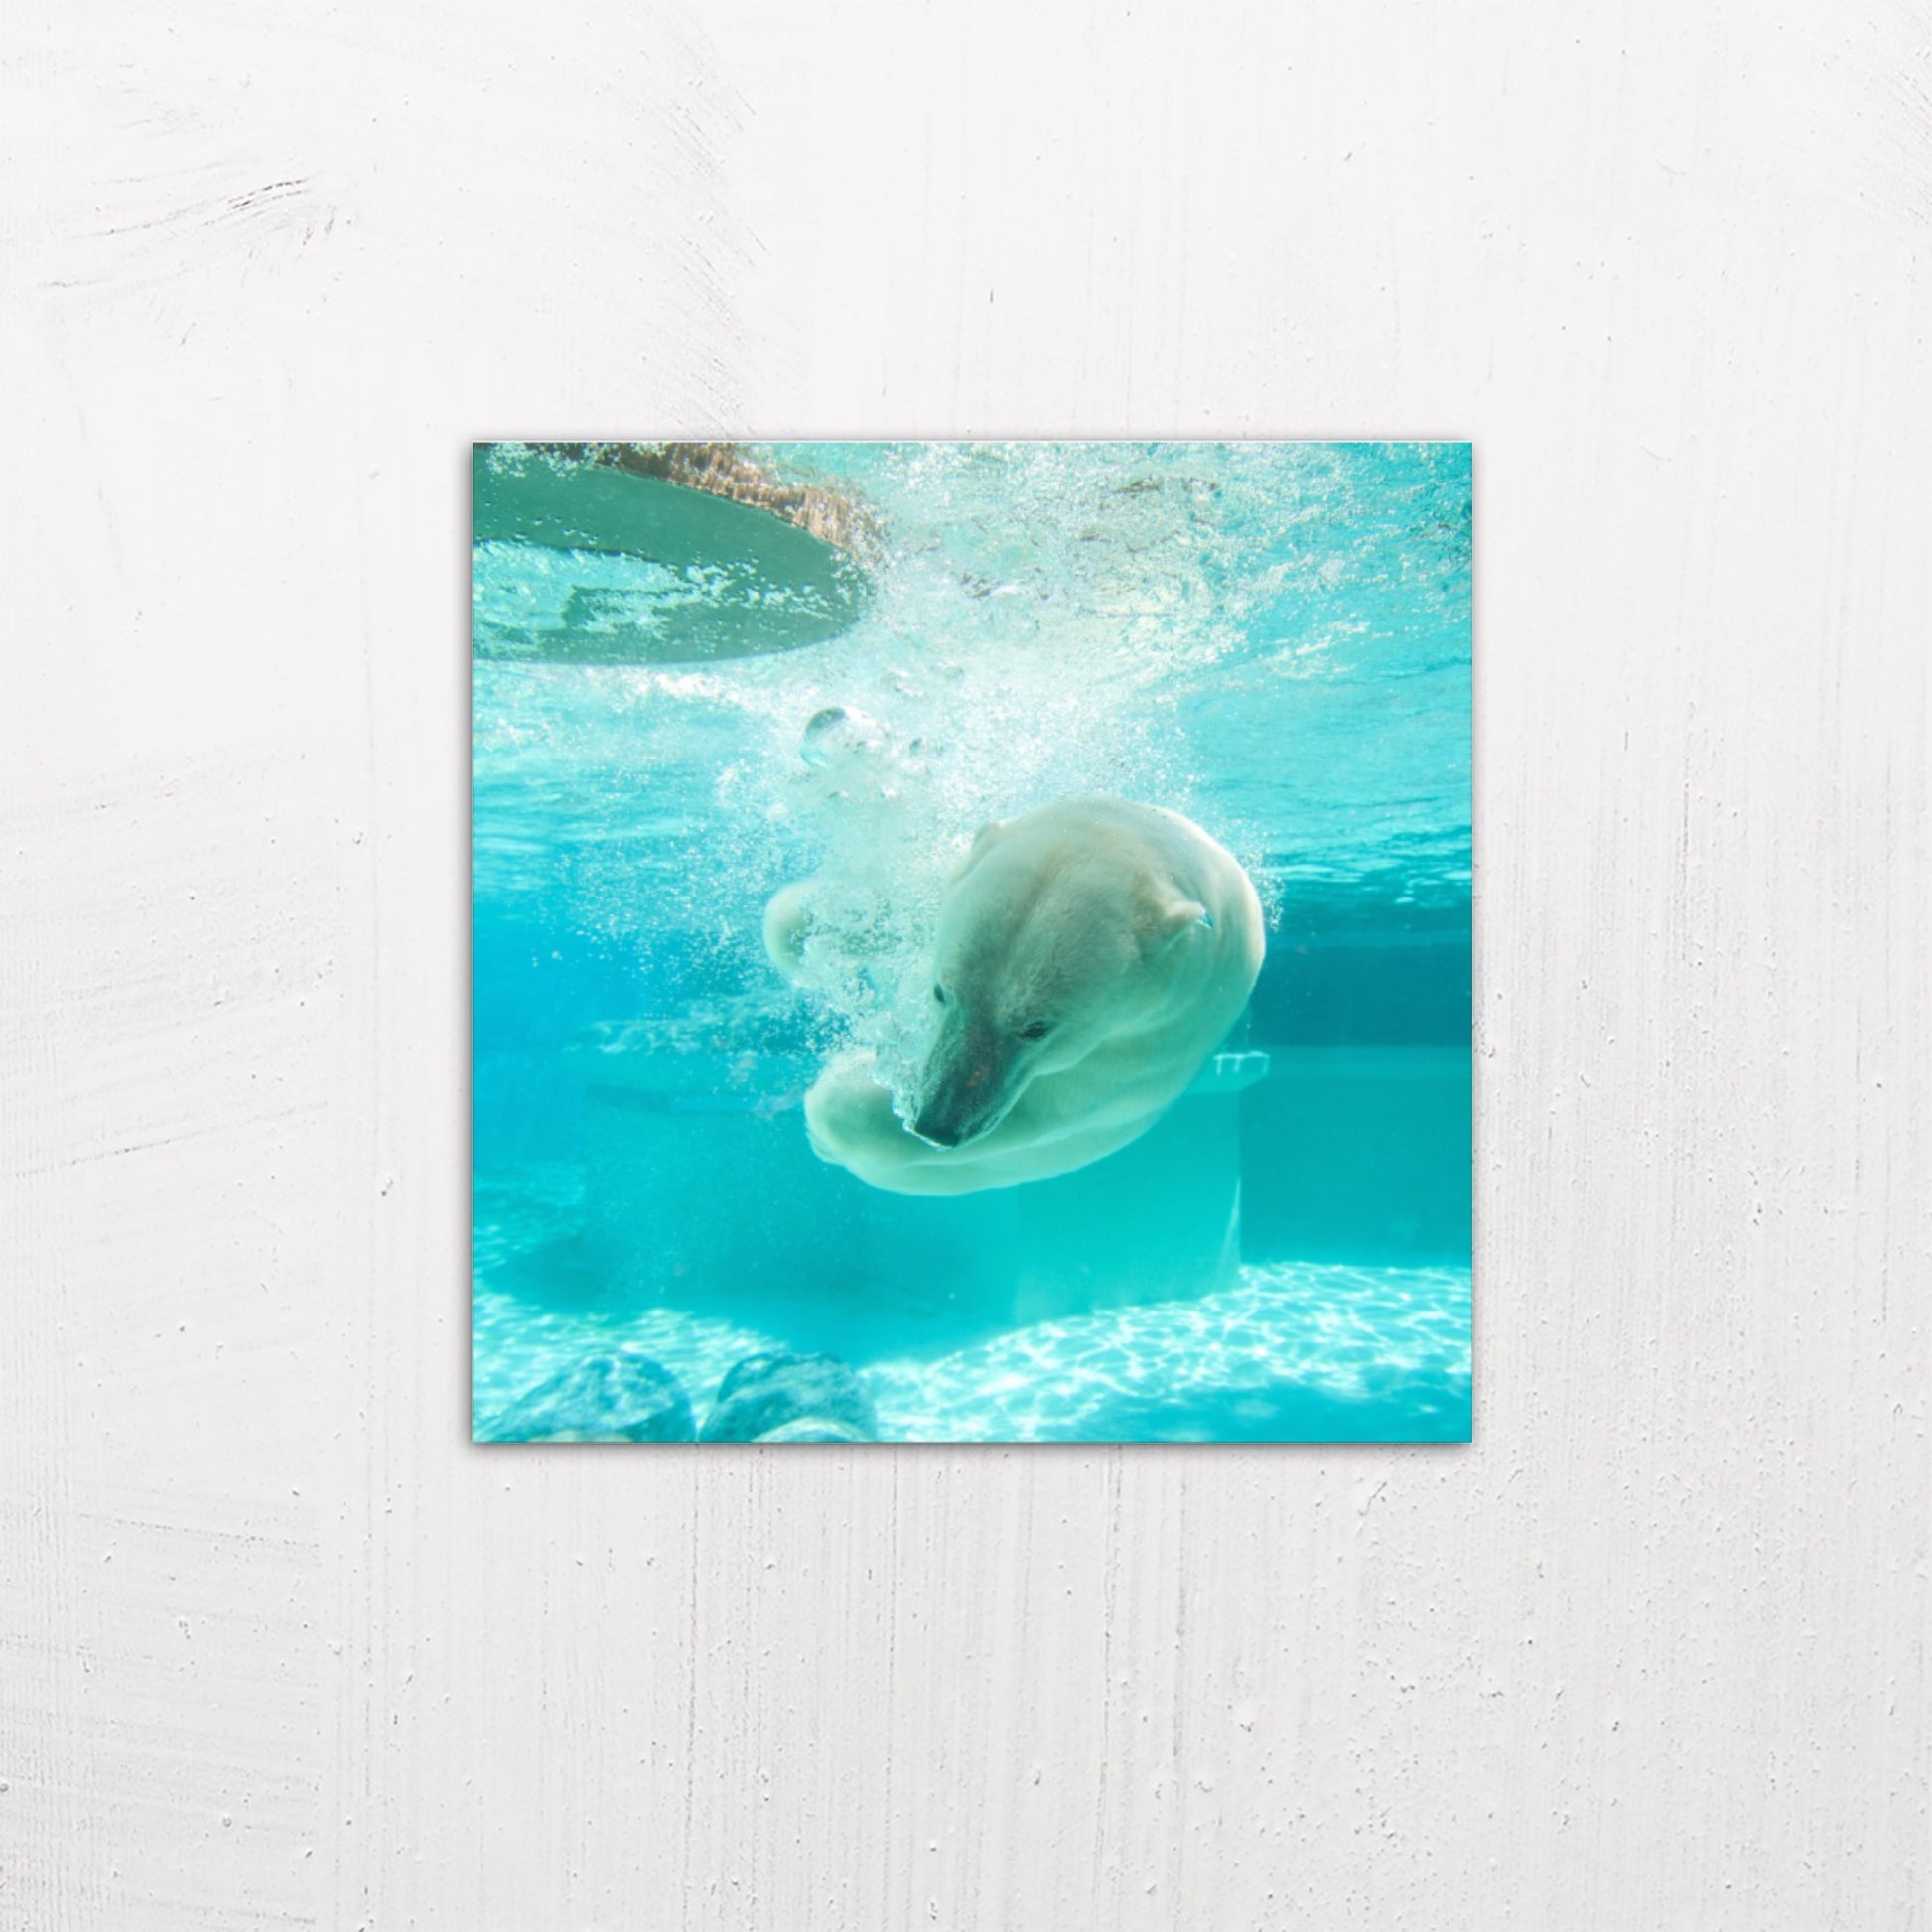 A medium size metal art poster display plate with printed design of a Polar Bear Under Water